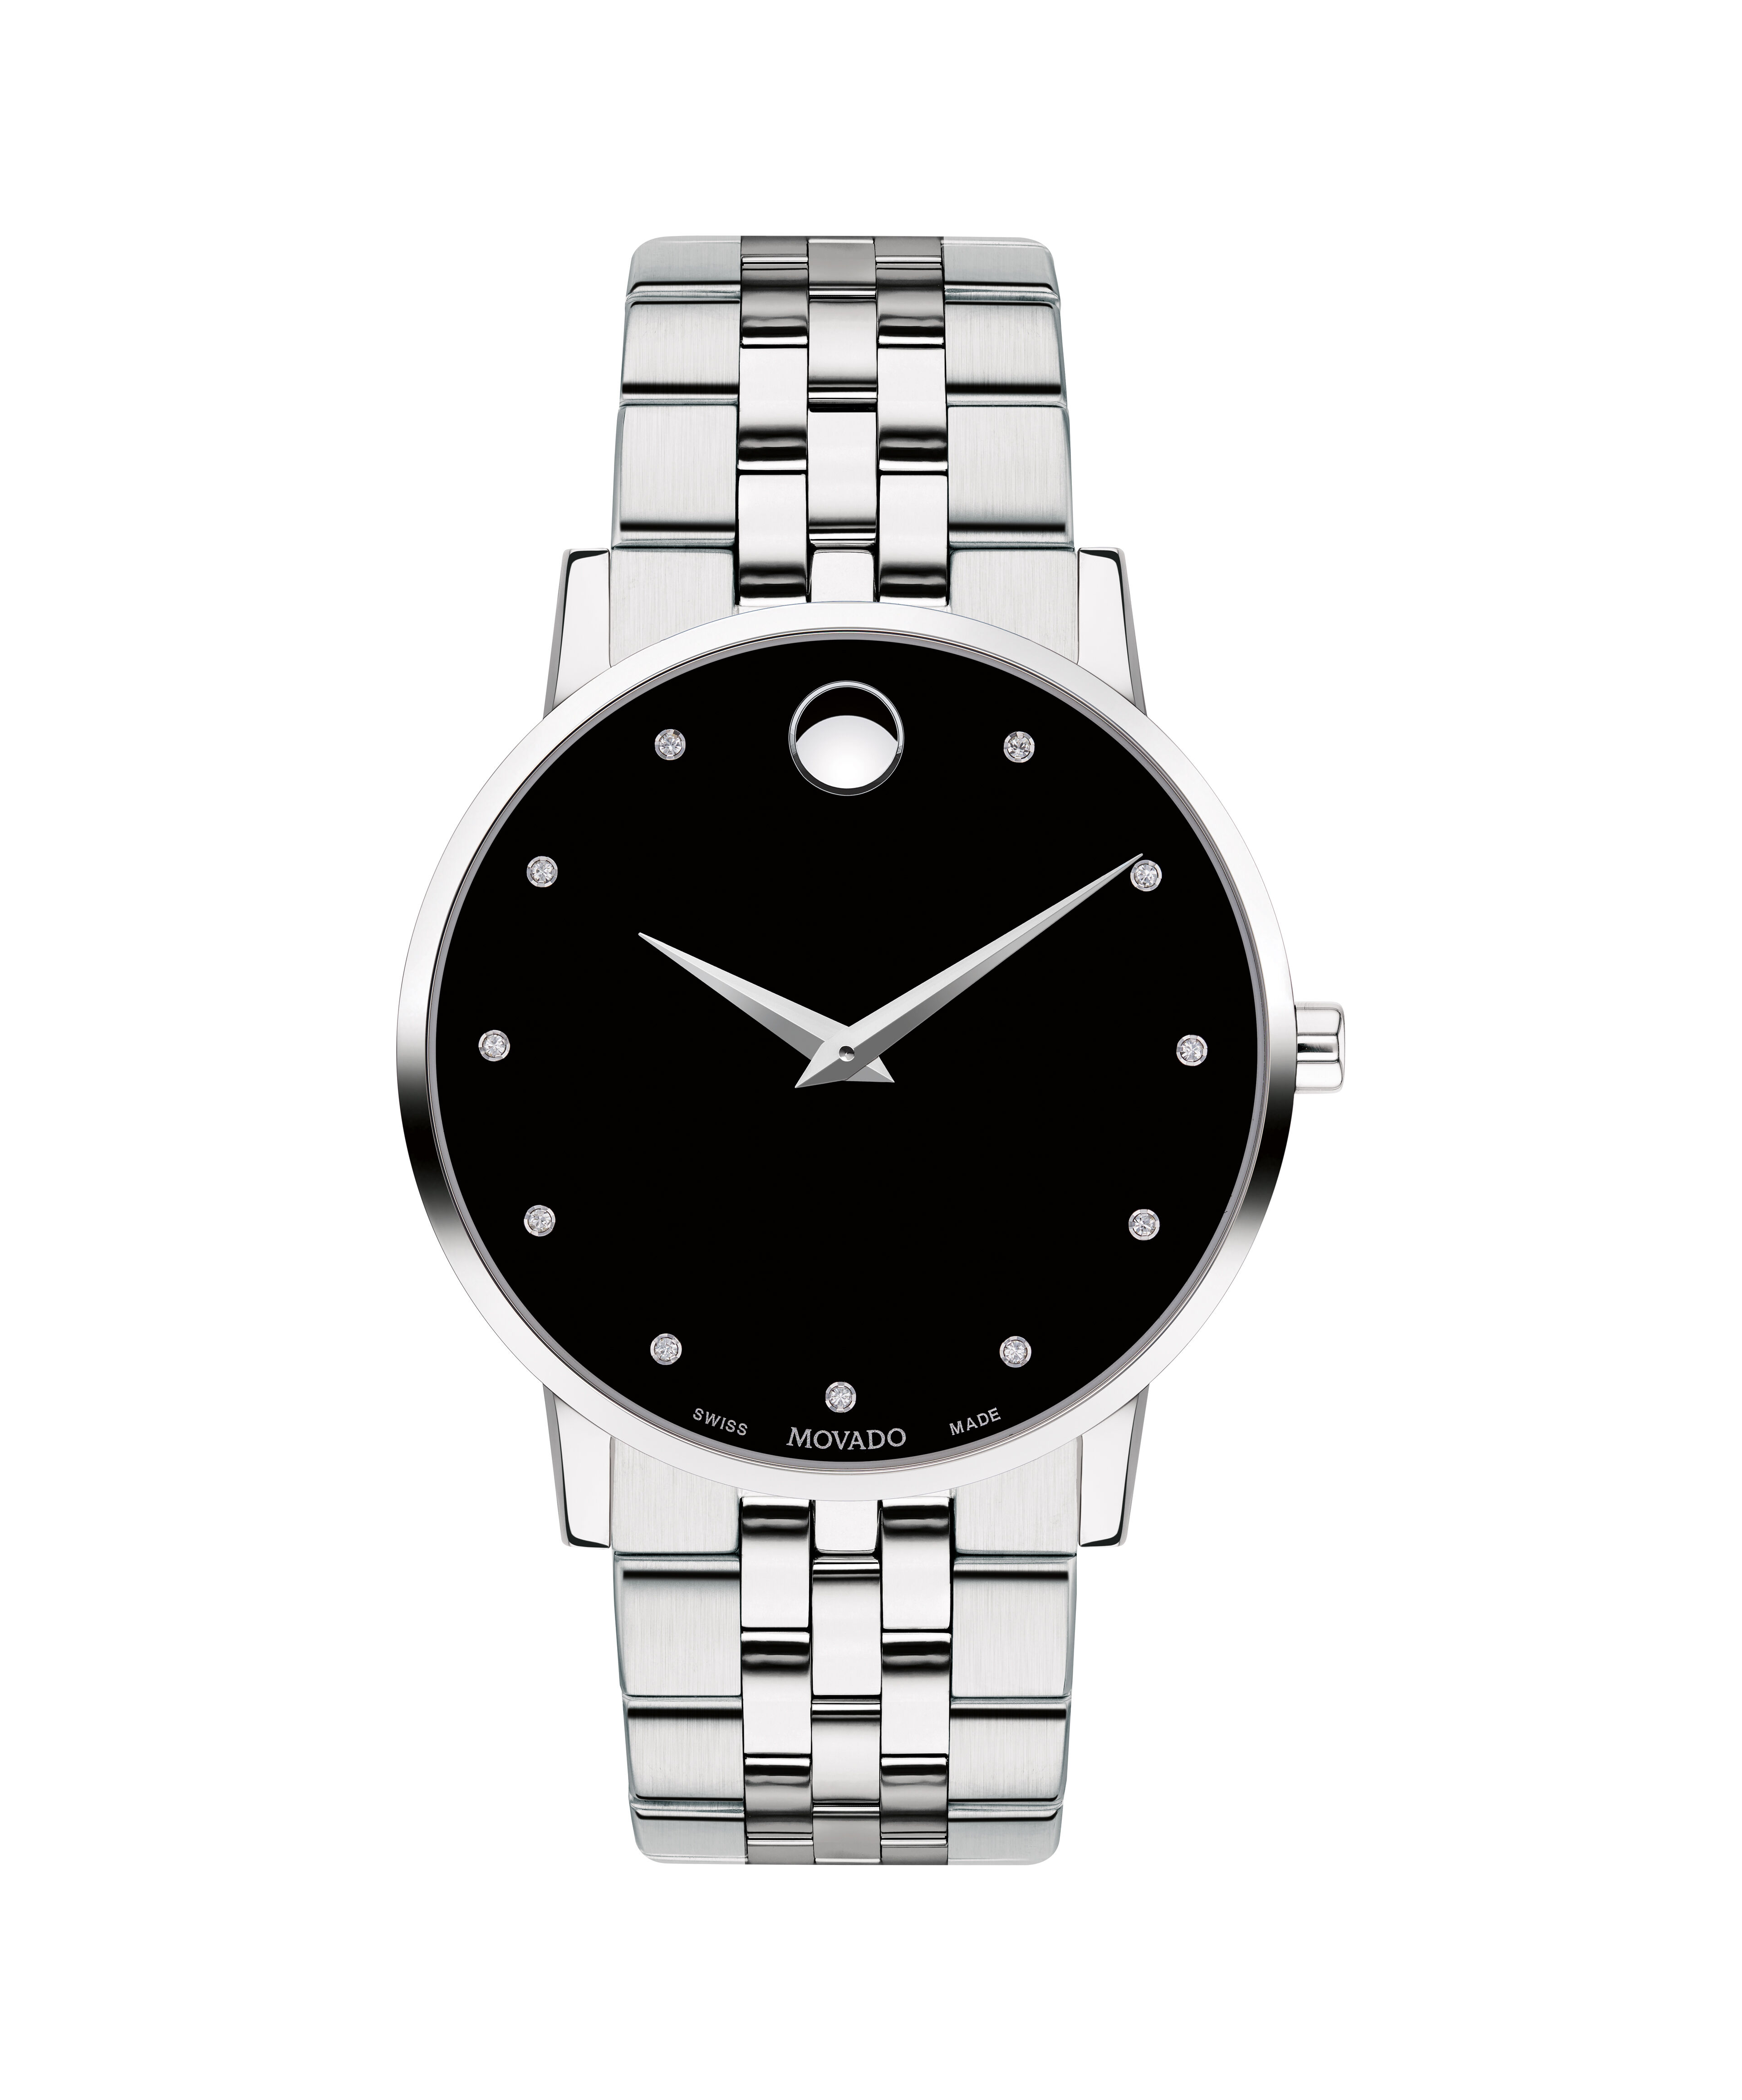 Movado STAINLESS STEEL KINGMATIC CLASSIC LADY 28mm AUTOMATIC DATE WATCH